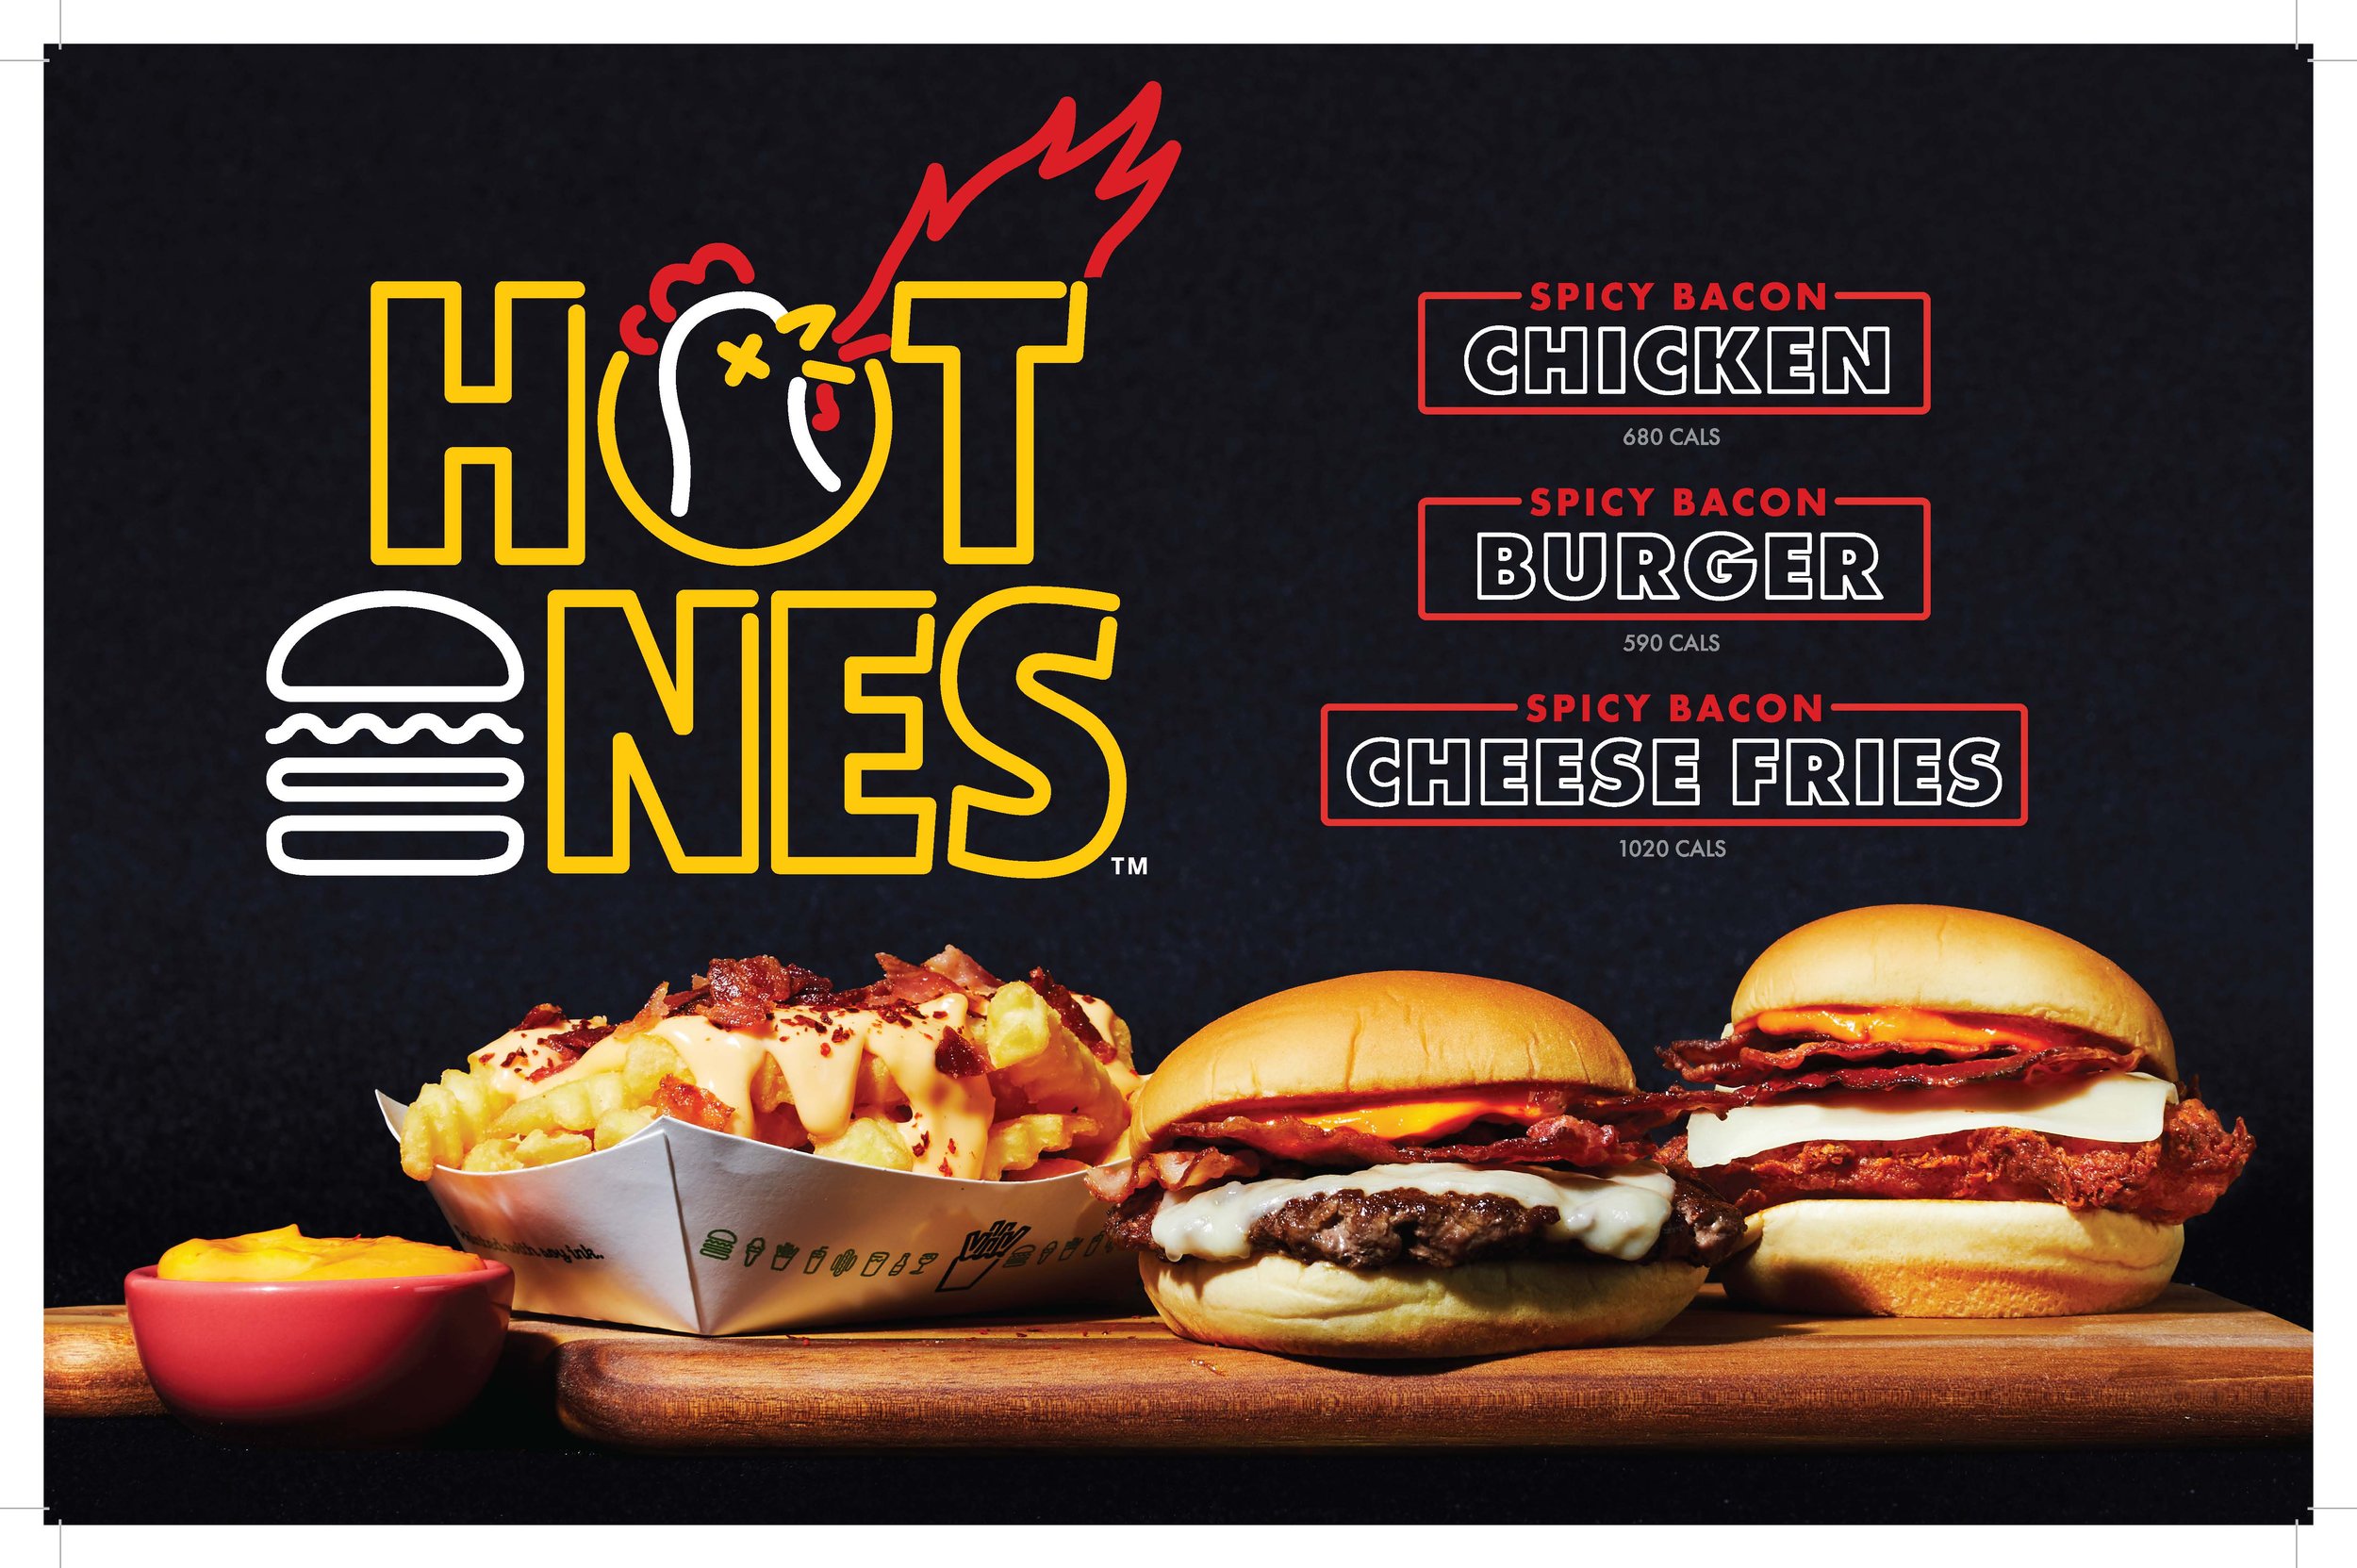 Shake Shack x Hot Ones Collab Campaign 